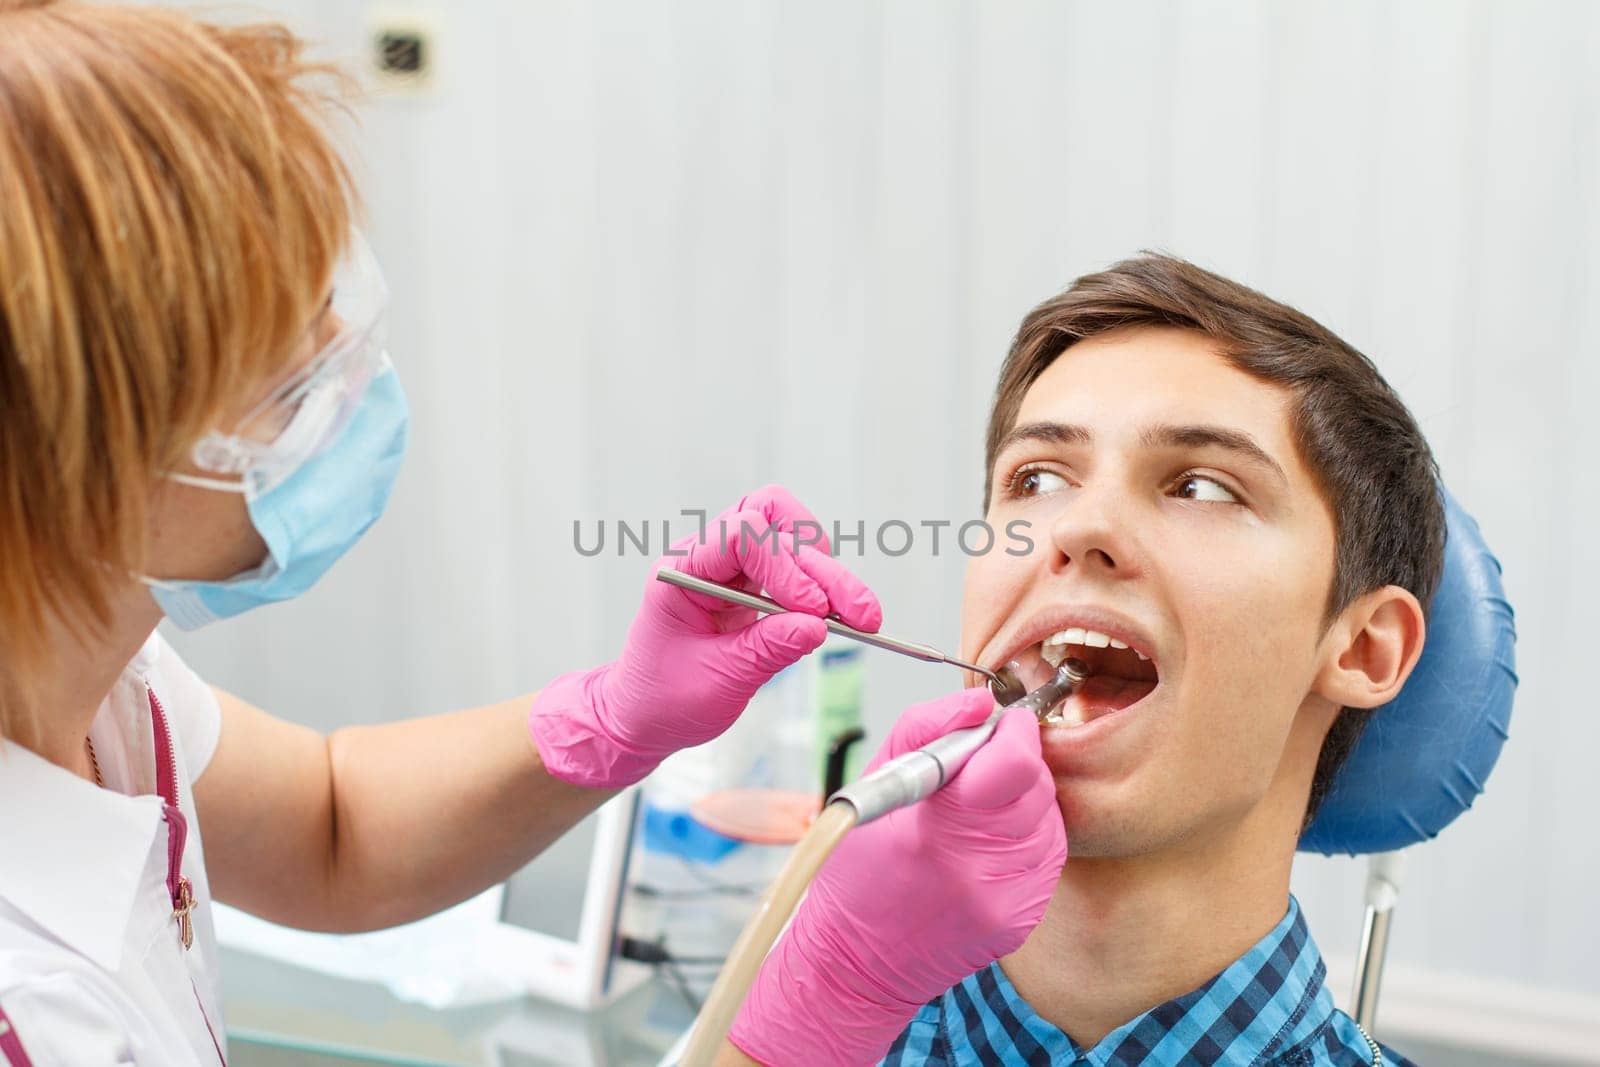 Female dentist is treating a patient tooth in dental office with focus on patient mouth. Dentistry